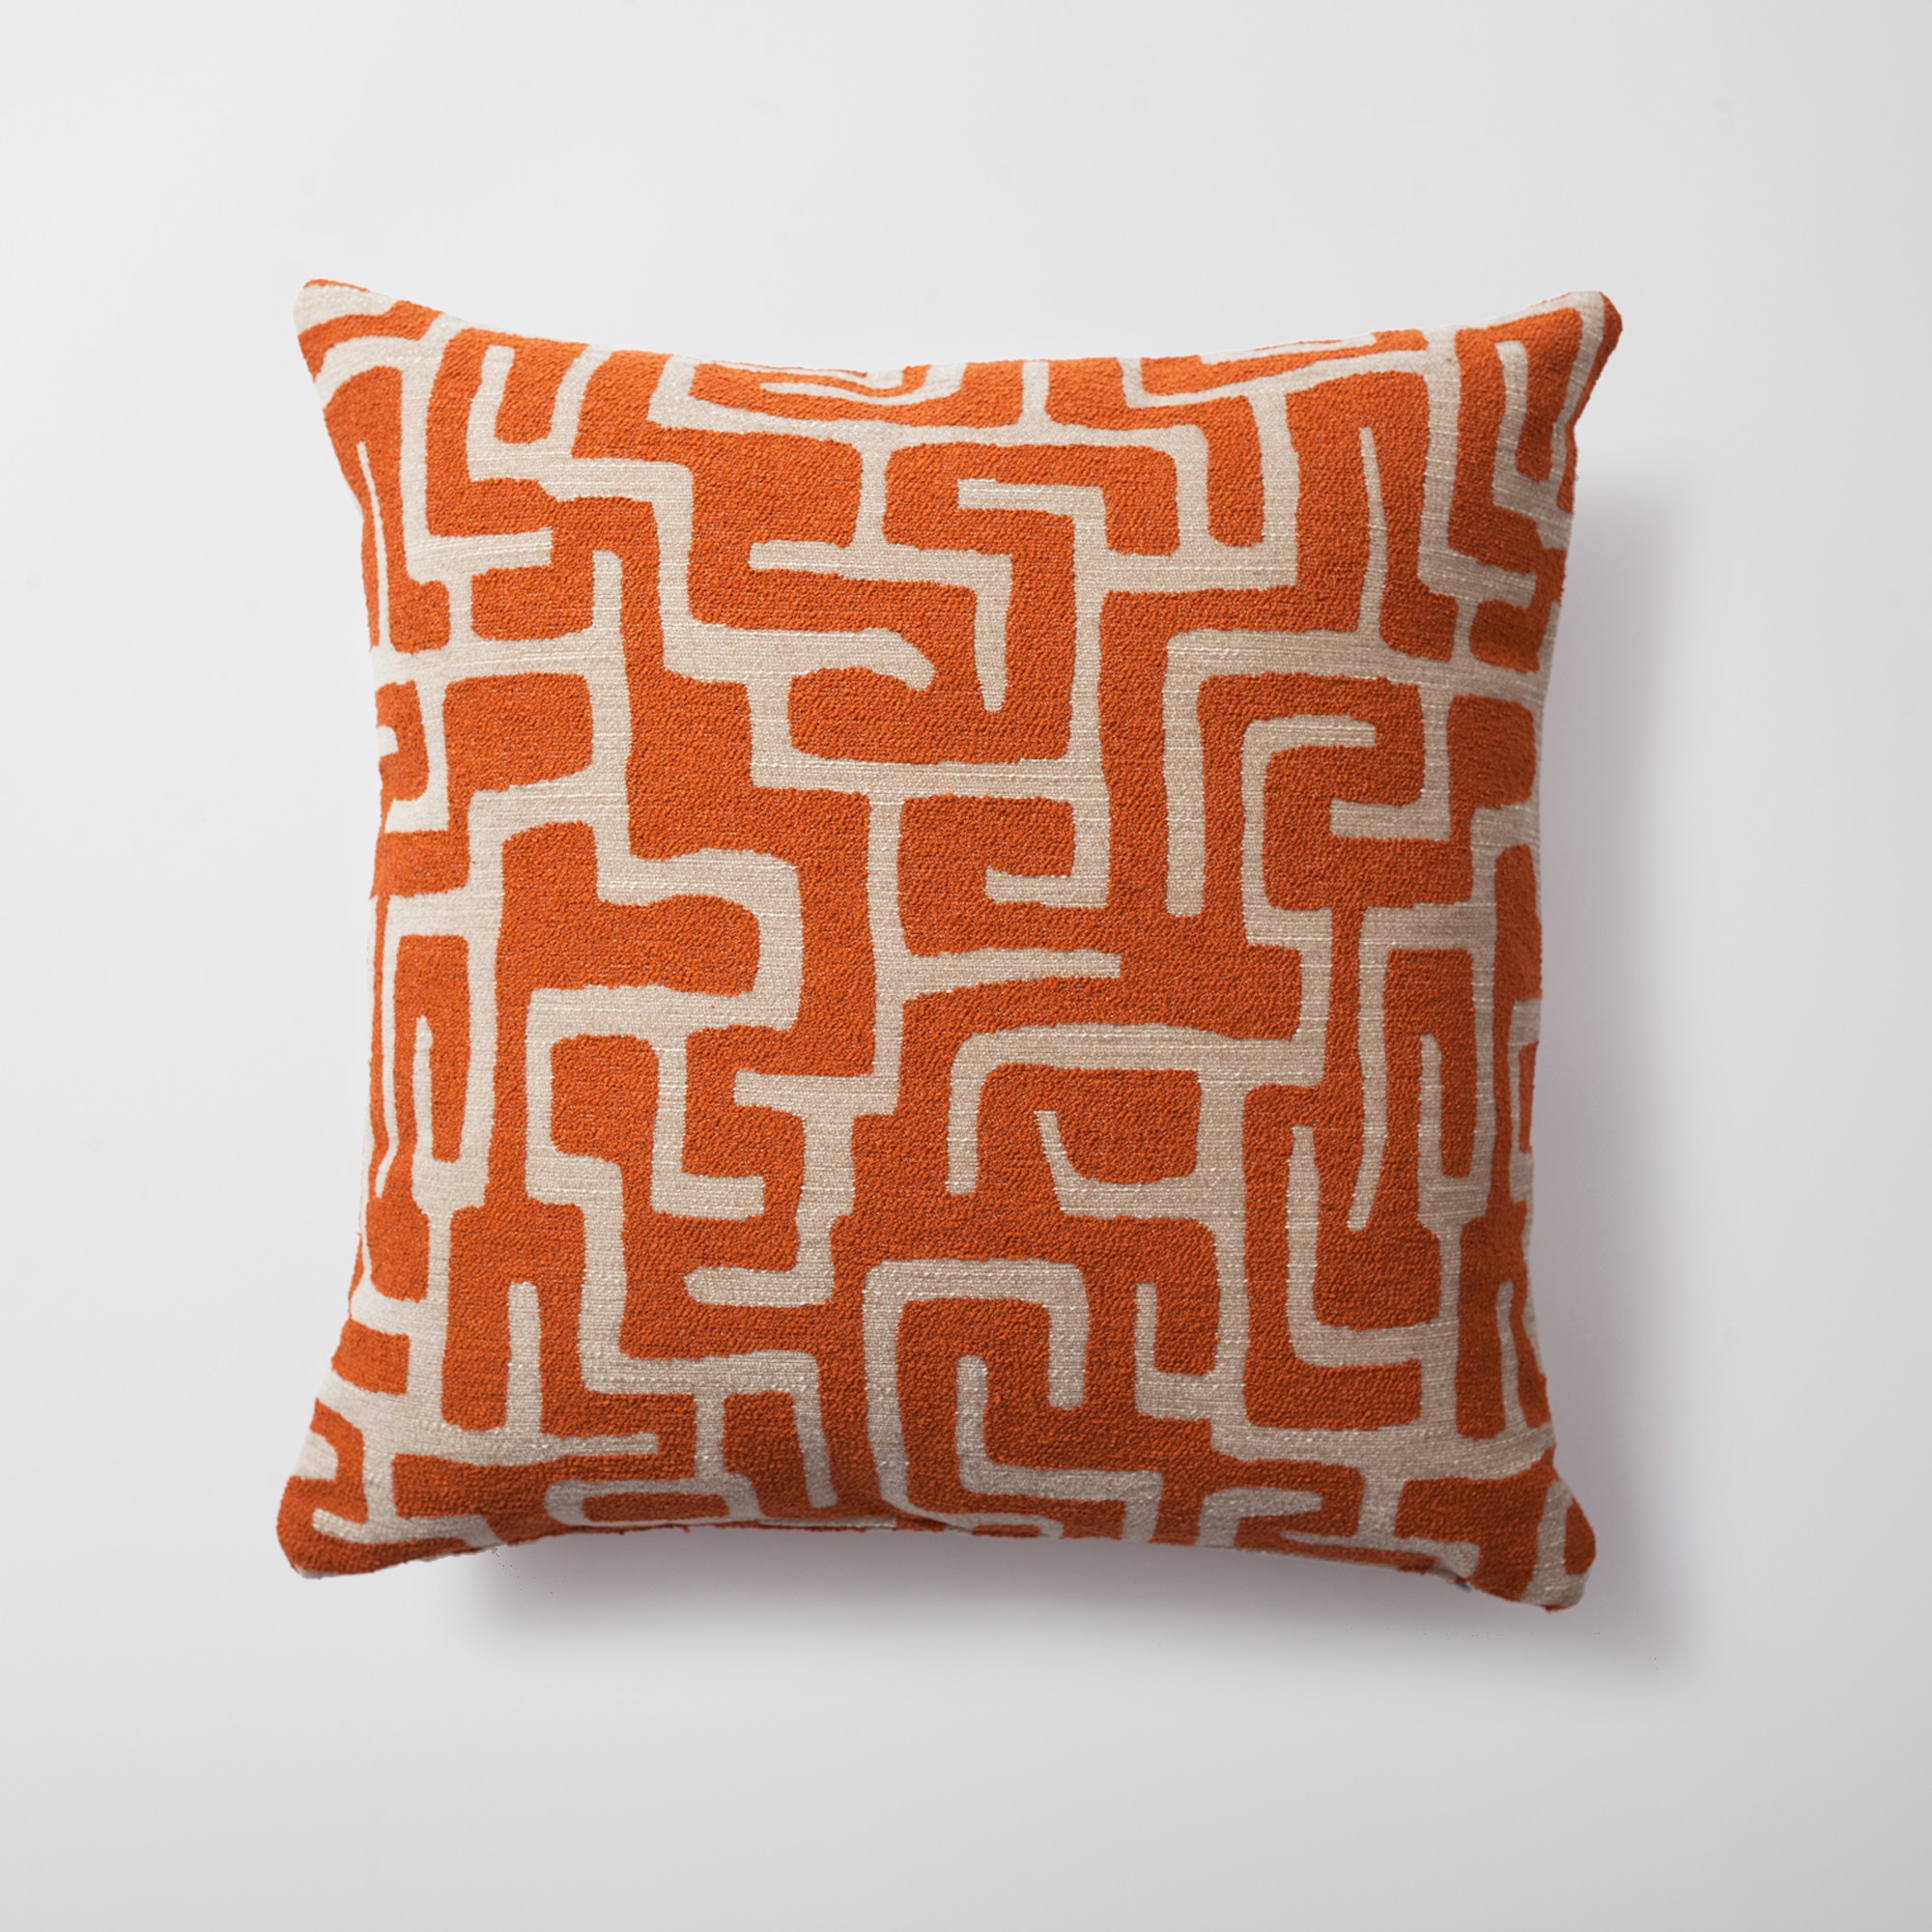 "Norm" - Maze Patterned 20x20 Inch Pillow - Orange (Cover Only)